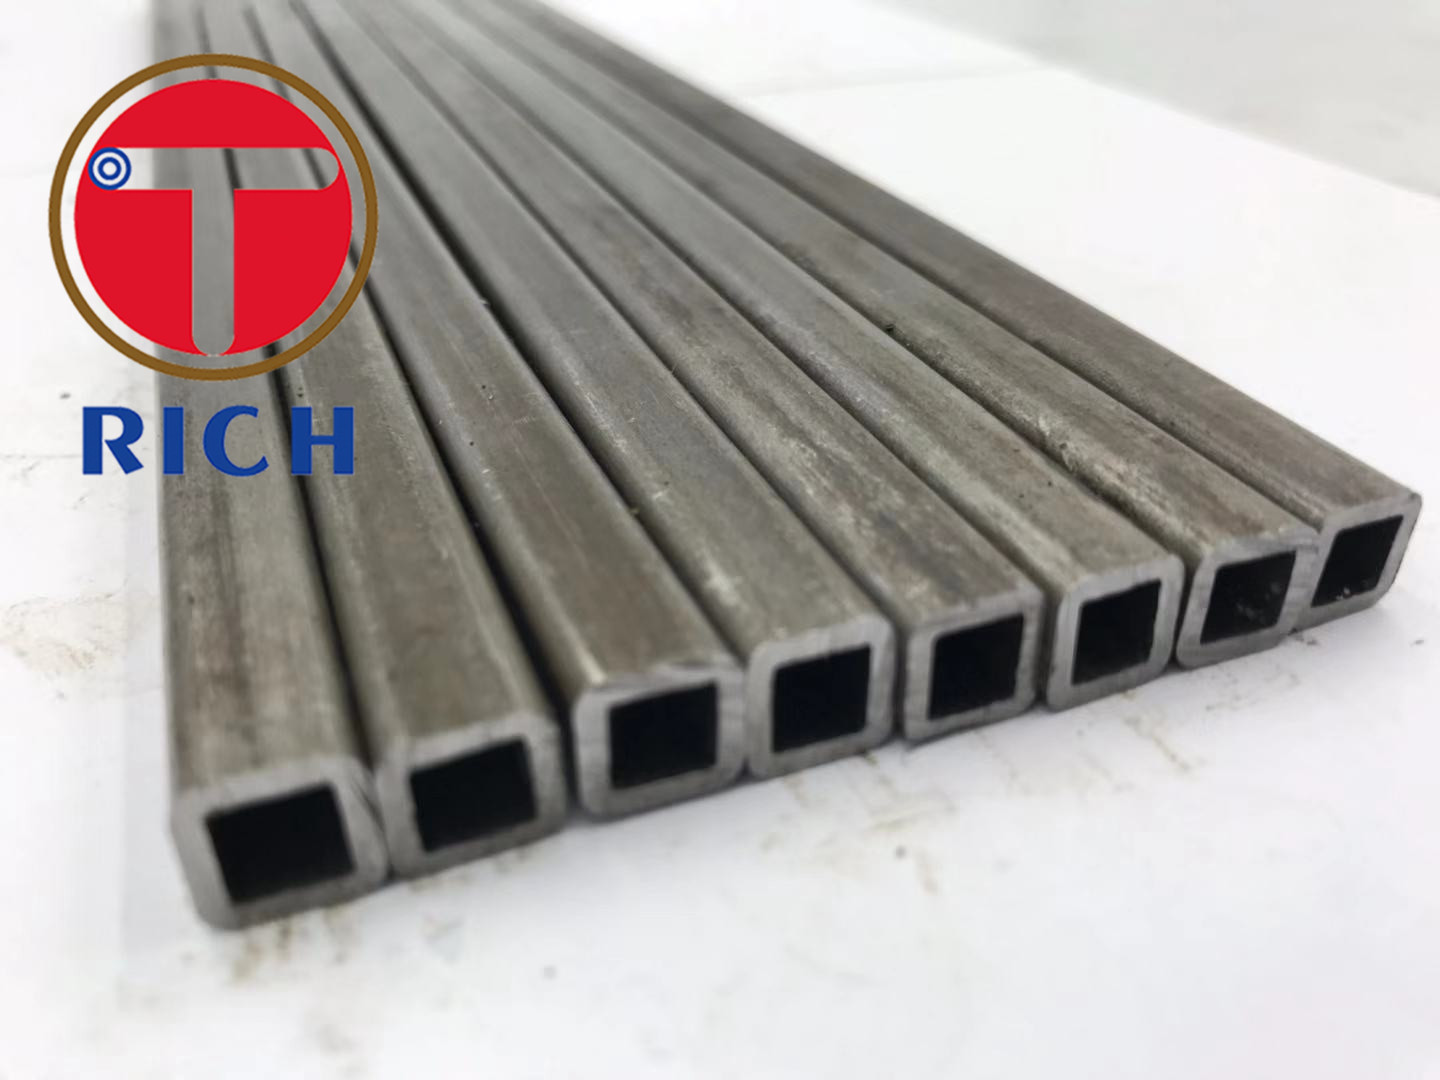 ASTM A500 Gr C Carbon MS Steel Seamless Square Tube 1020 Small Diameter A500 Square Telescopic Tube